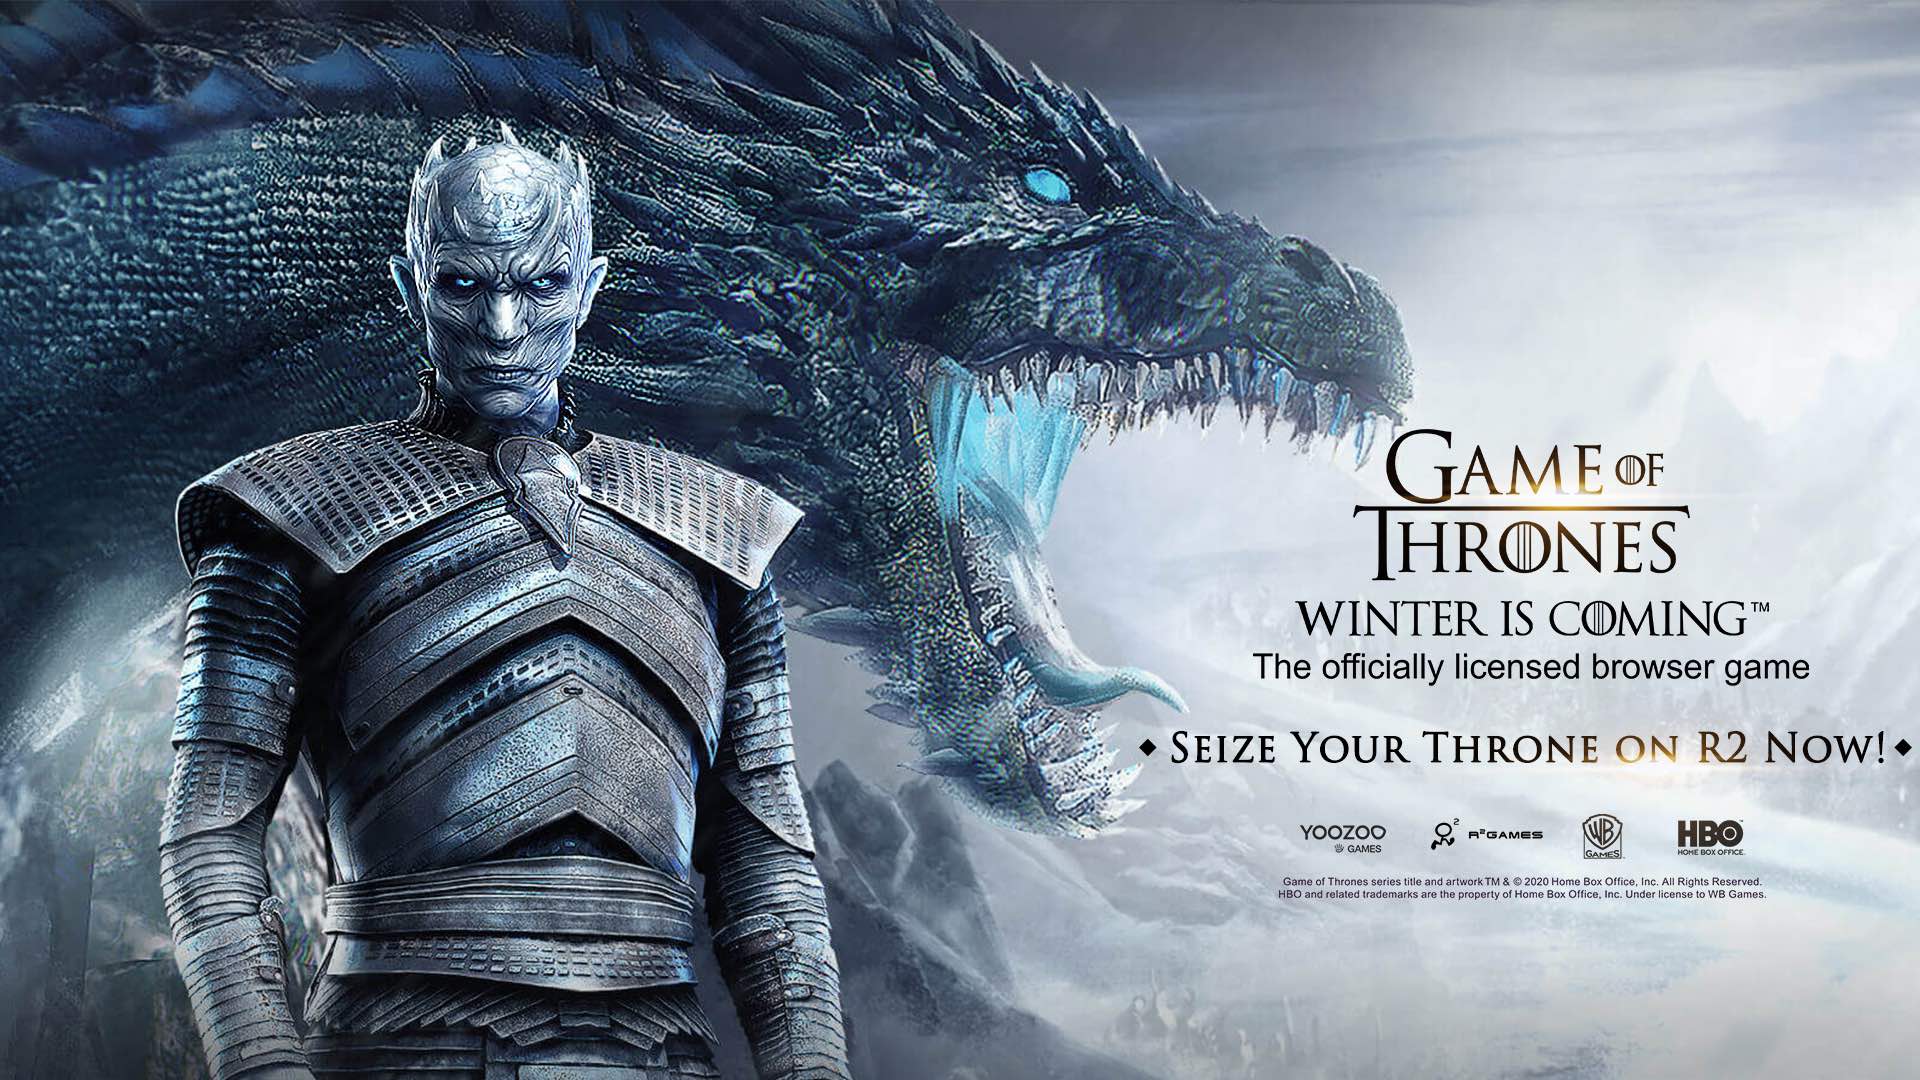 5 Reasons You Need to Play Game of Thrones Winter is Coming on R2Games